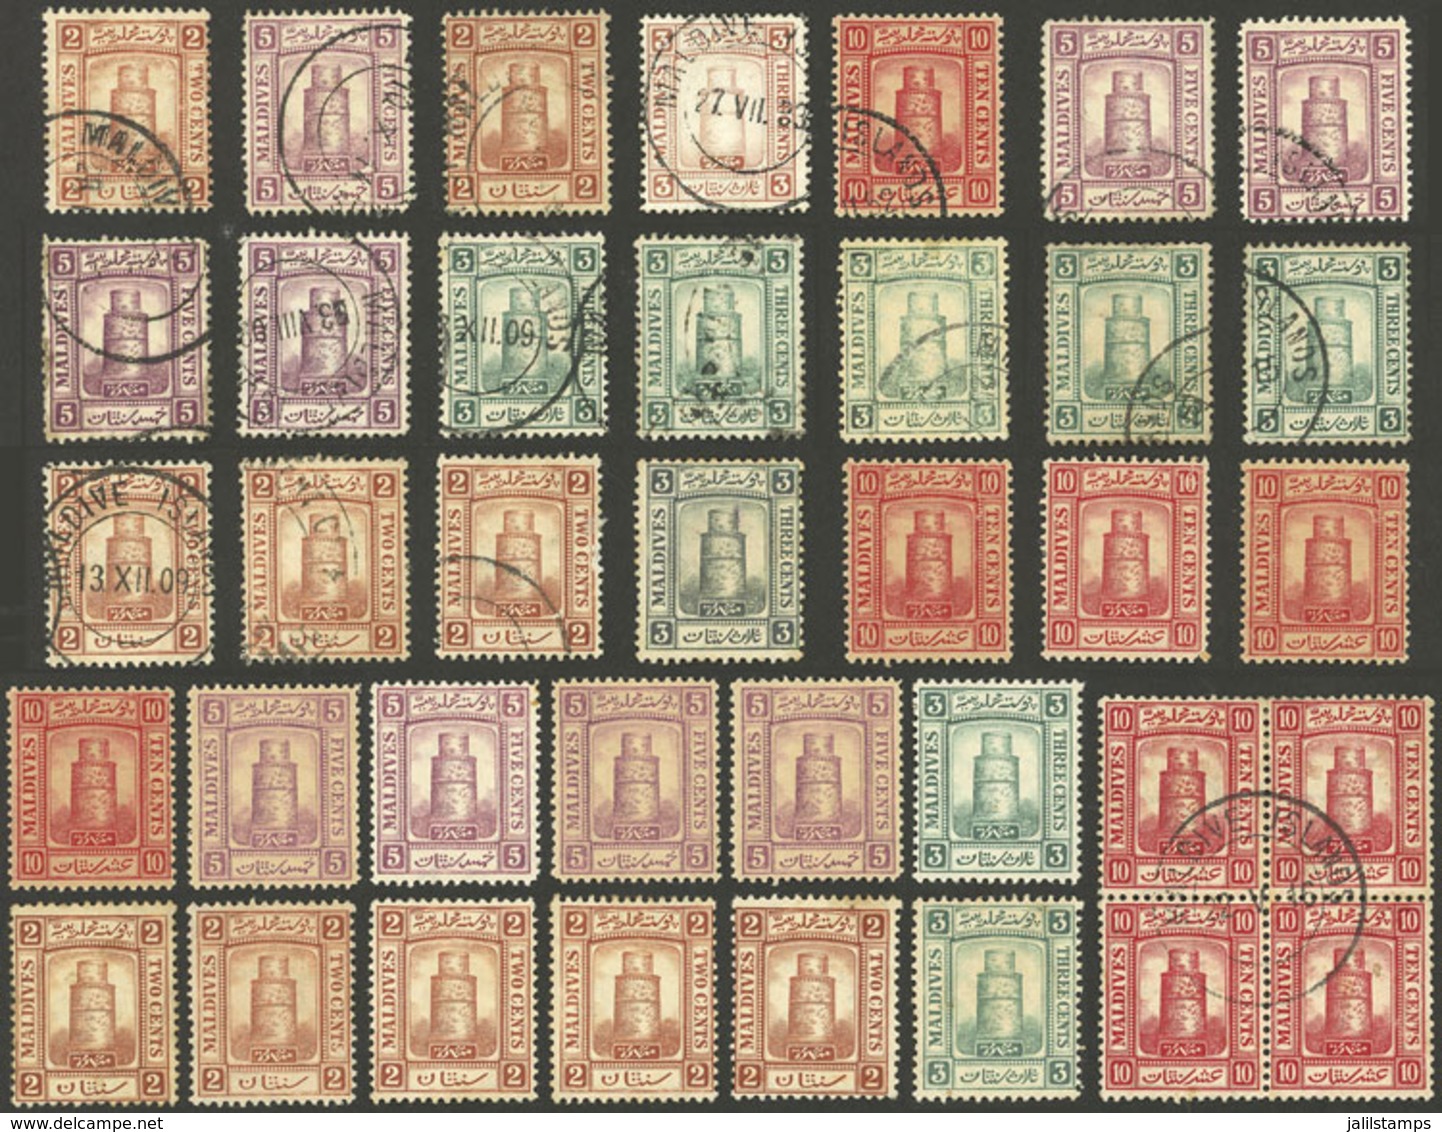 MALDIVES: Small Lot Of Used Or Mint Stamps, Very Fine General Quality! - Maldives (...-1965)